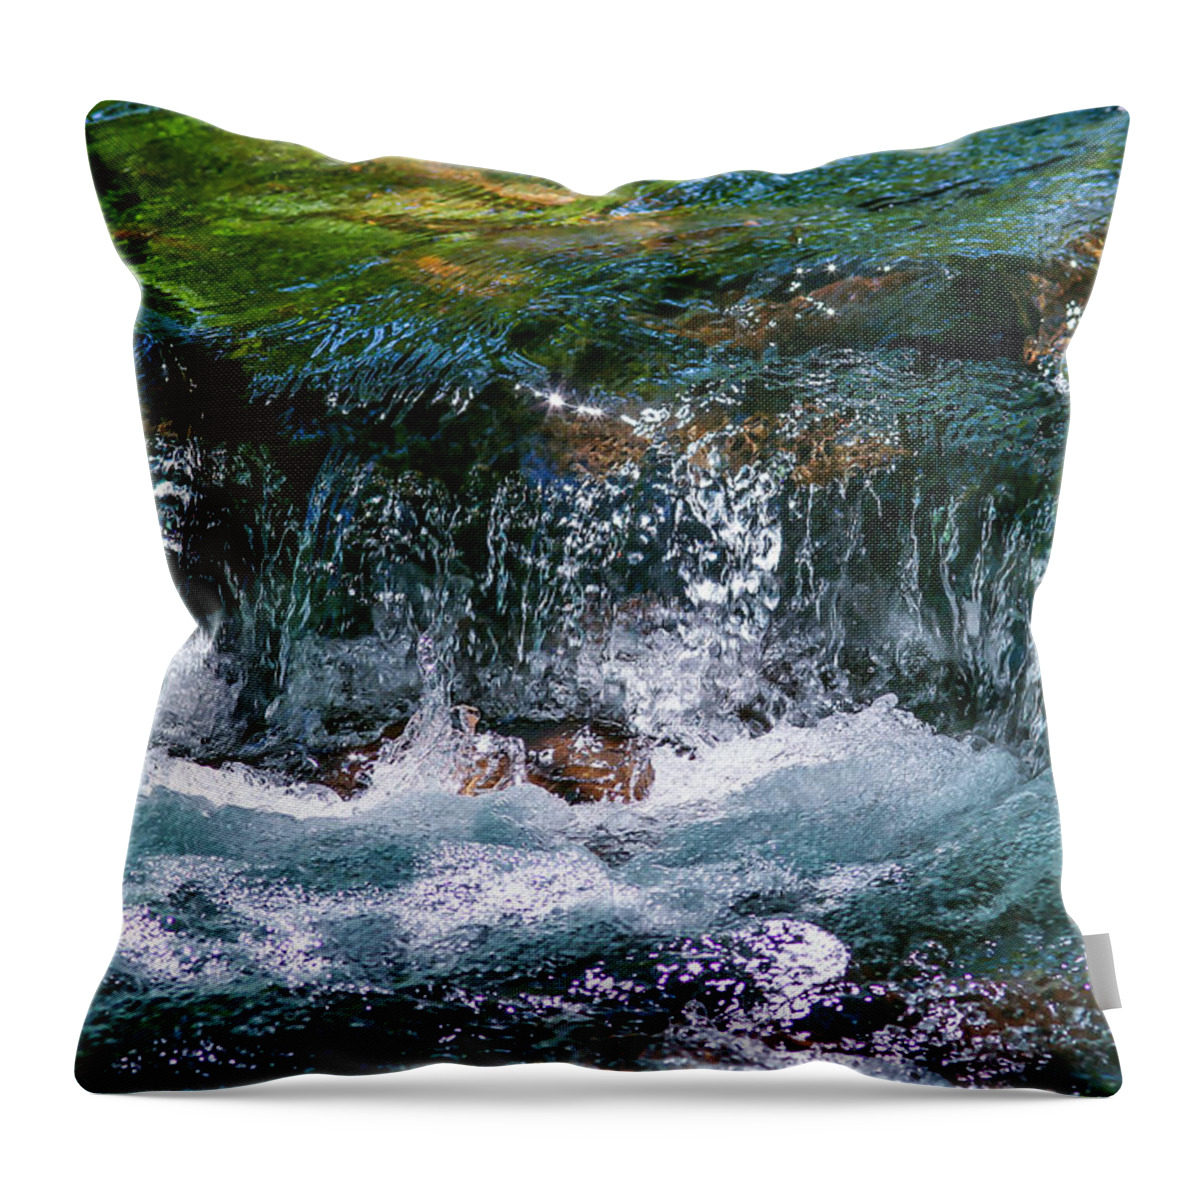 Water Throw Pillow featuring the photograph Waterflow by Dennis Bucklin